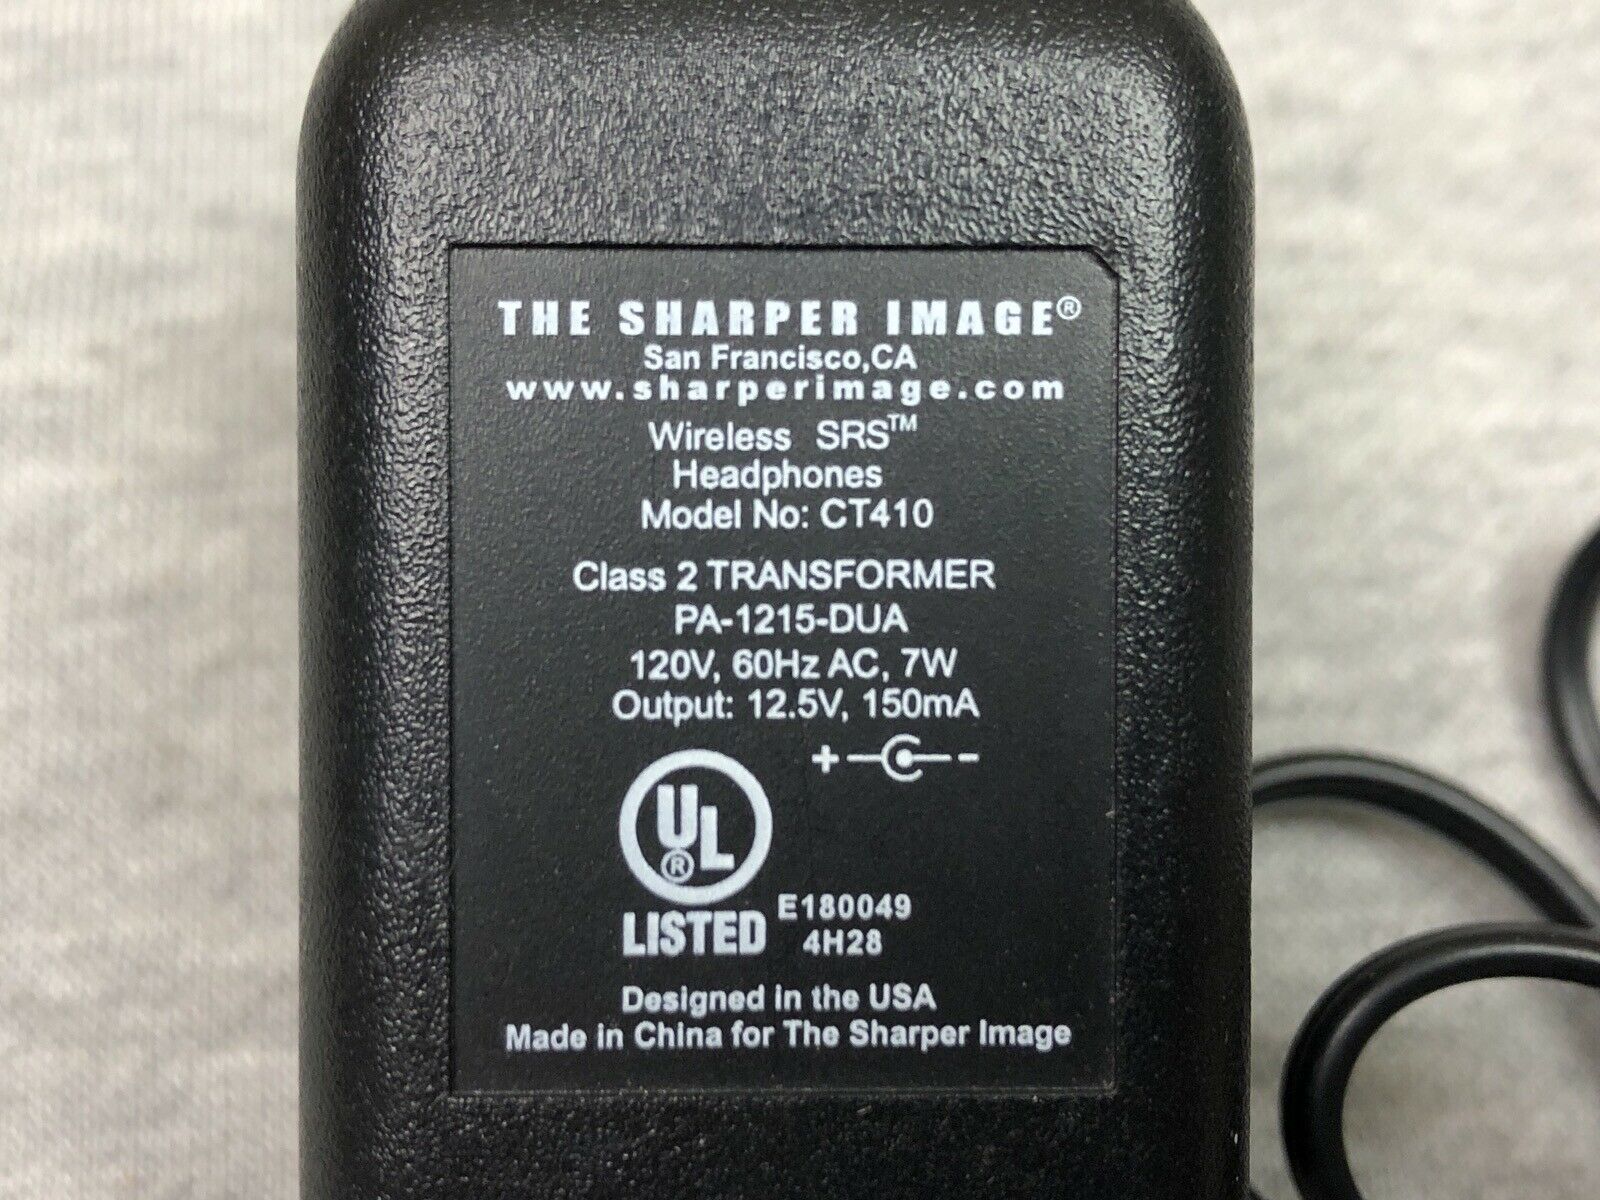 The Sharper Image CT410 Wireless SRS Headphones AC Adapter Output DC 12.5V 150mA Brand: SharperImage Type: AC/DC Adapte